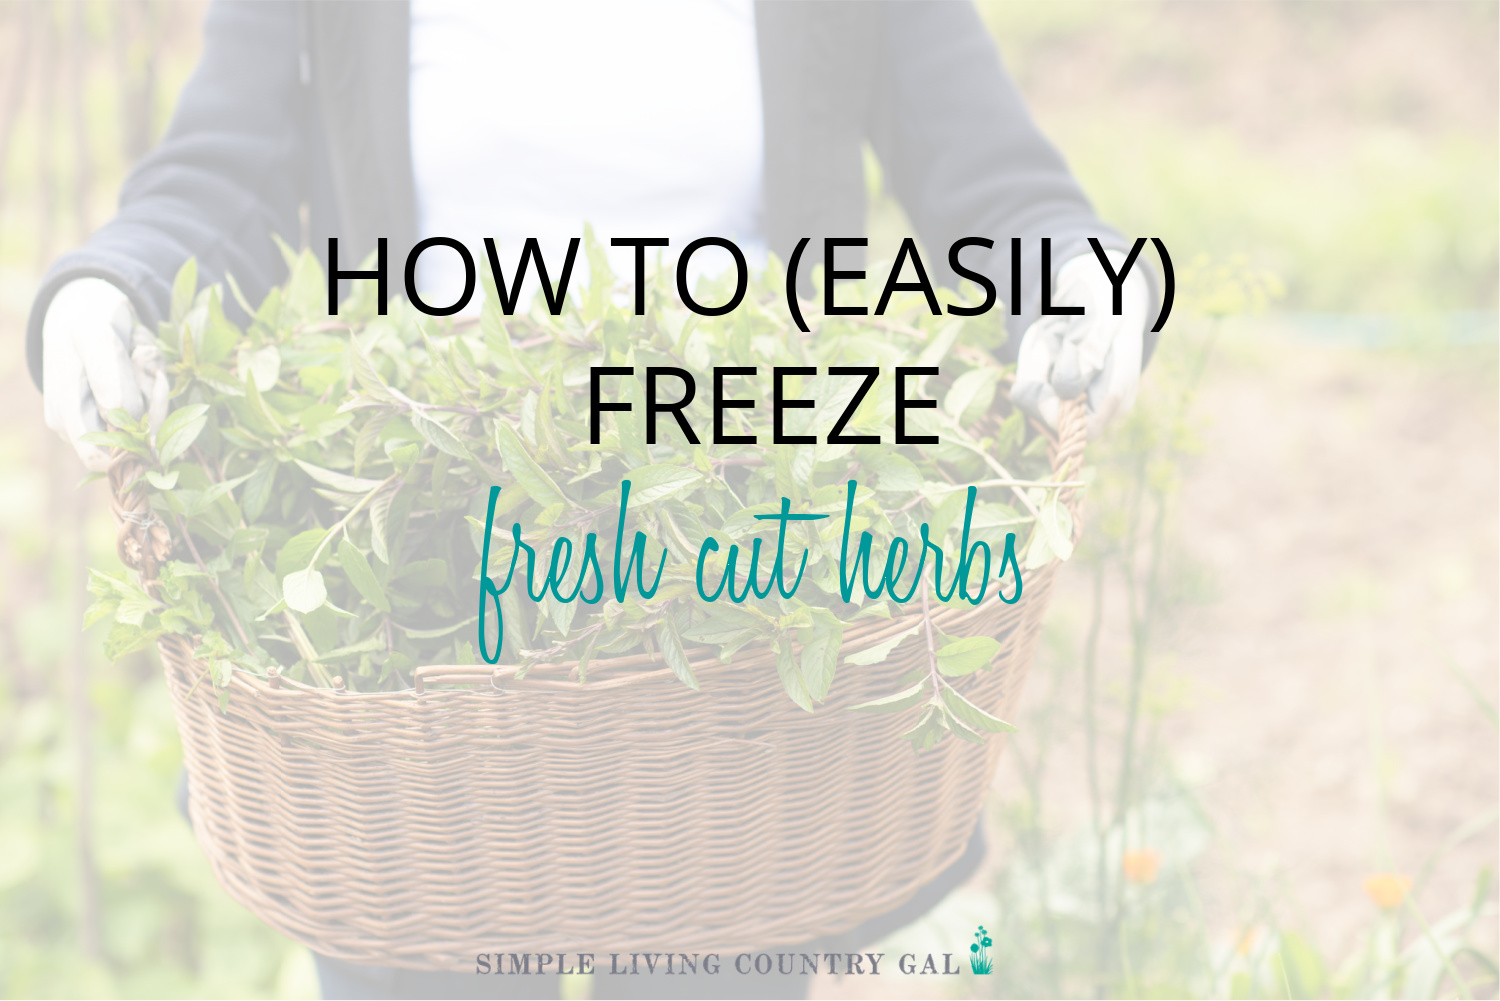 Have you grown an over abundance of herbs? Chop, mix and freeze